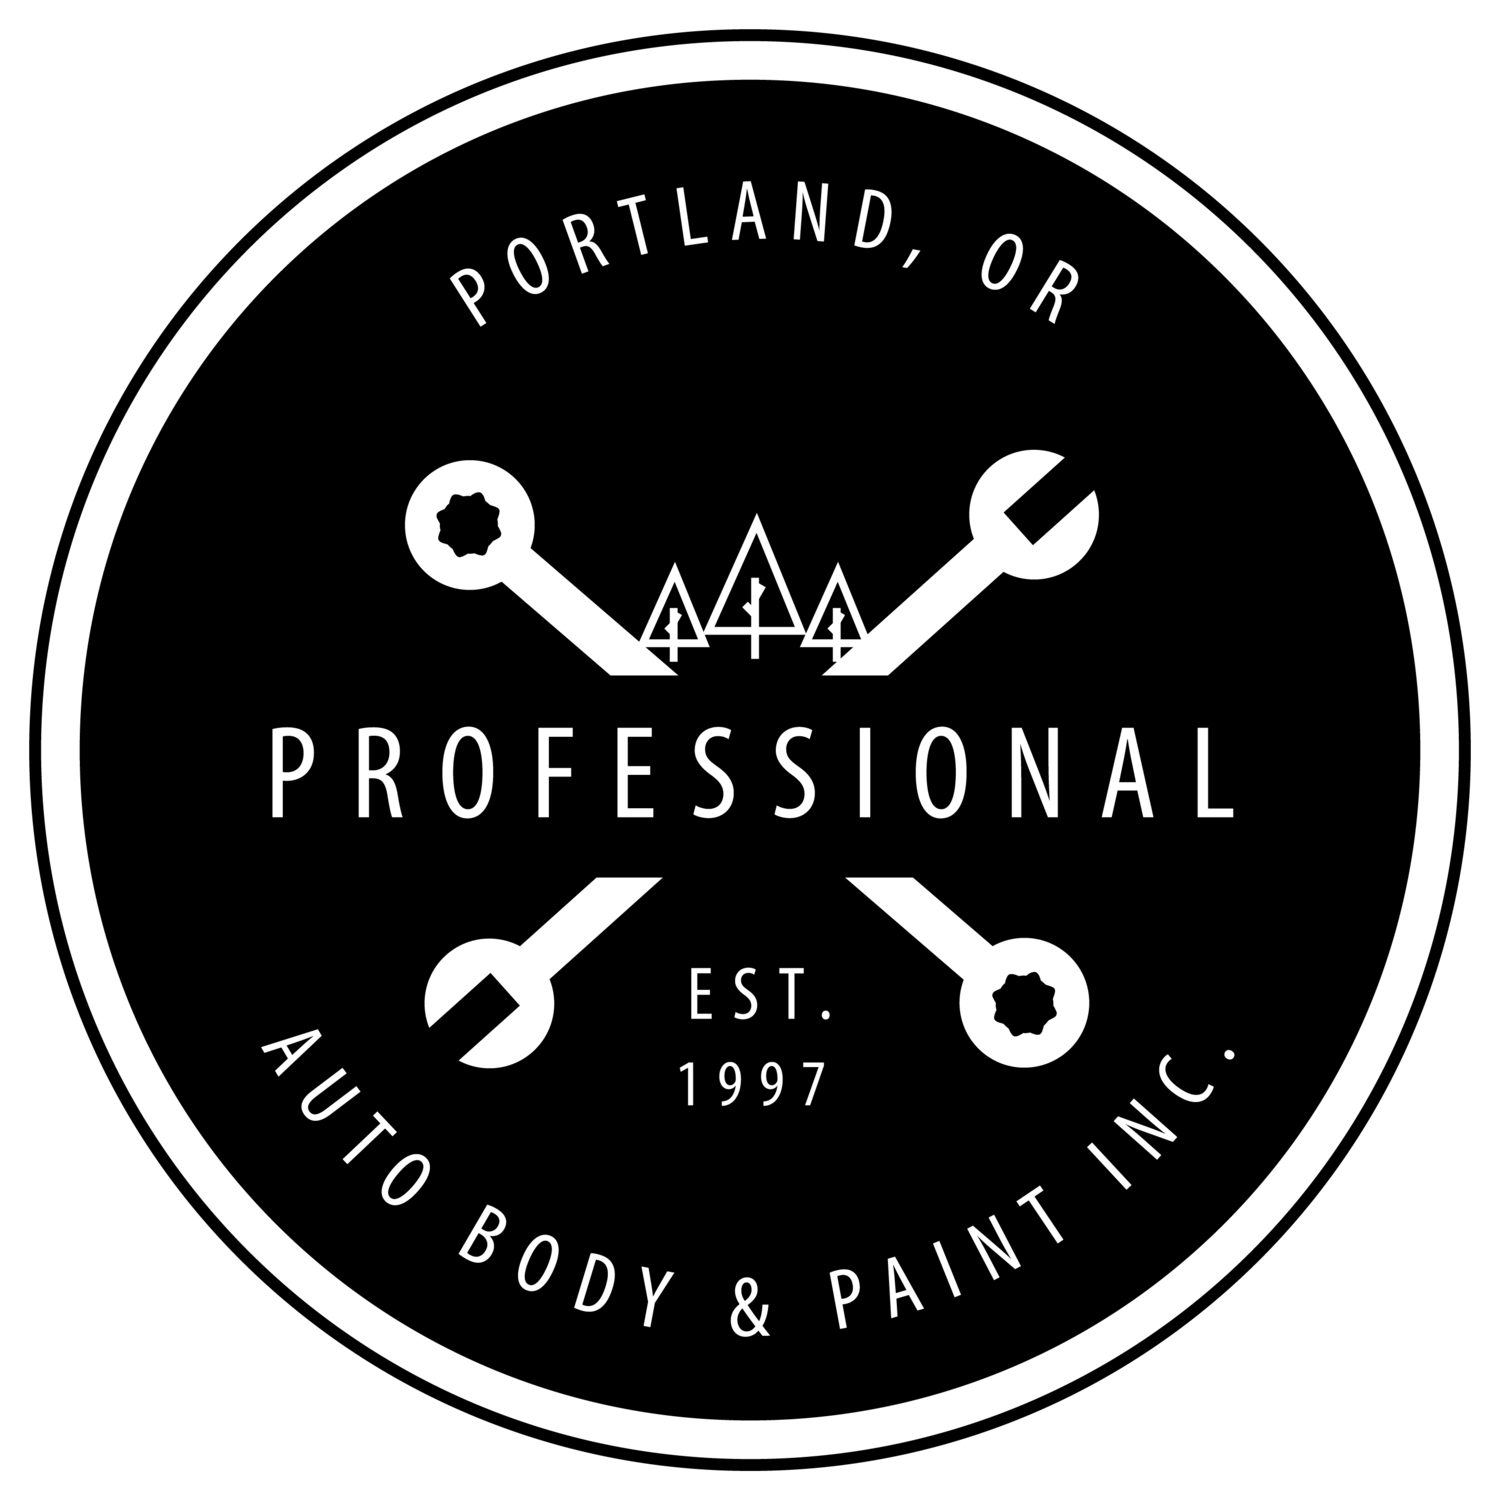 5-Star Review Auto Body Repair Shop in Portland since 1997